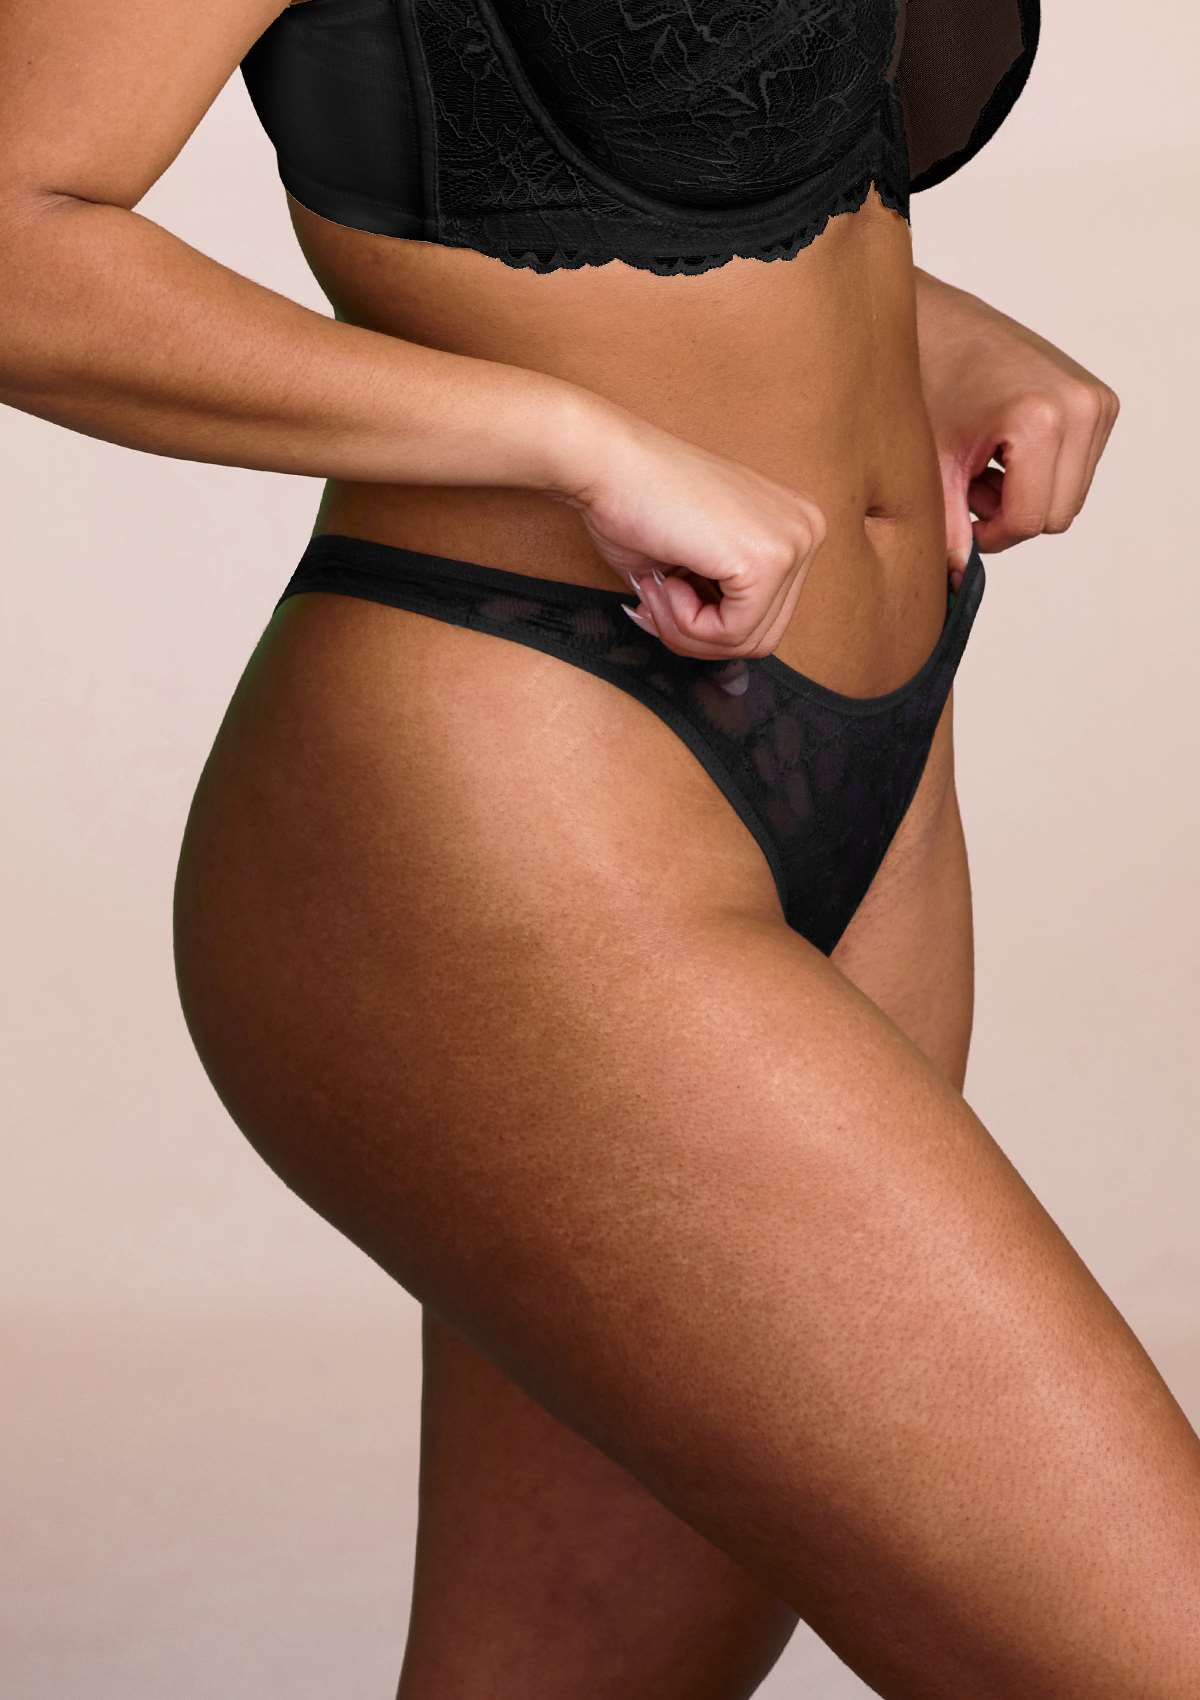 HSIA Soft Sexy Mesh Thong Underwear 3 Pack - S / Black+White+Light Coral